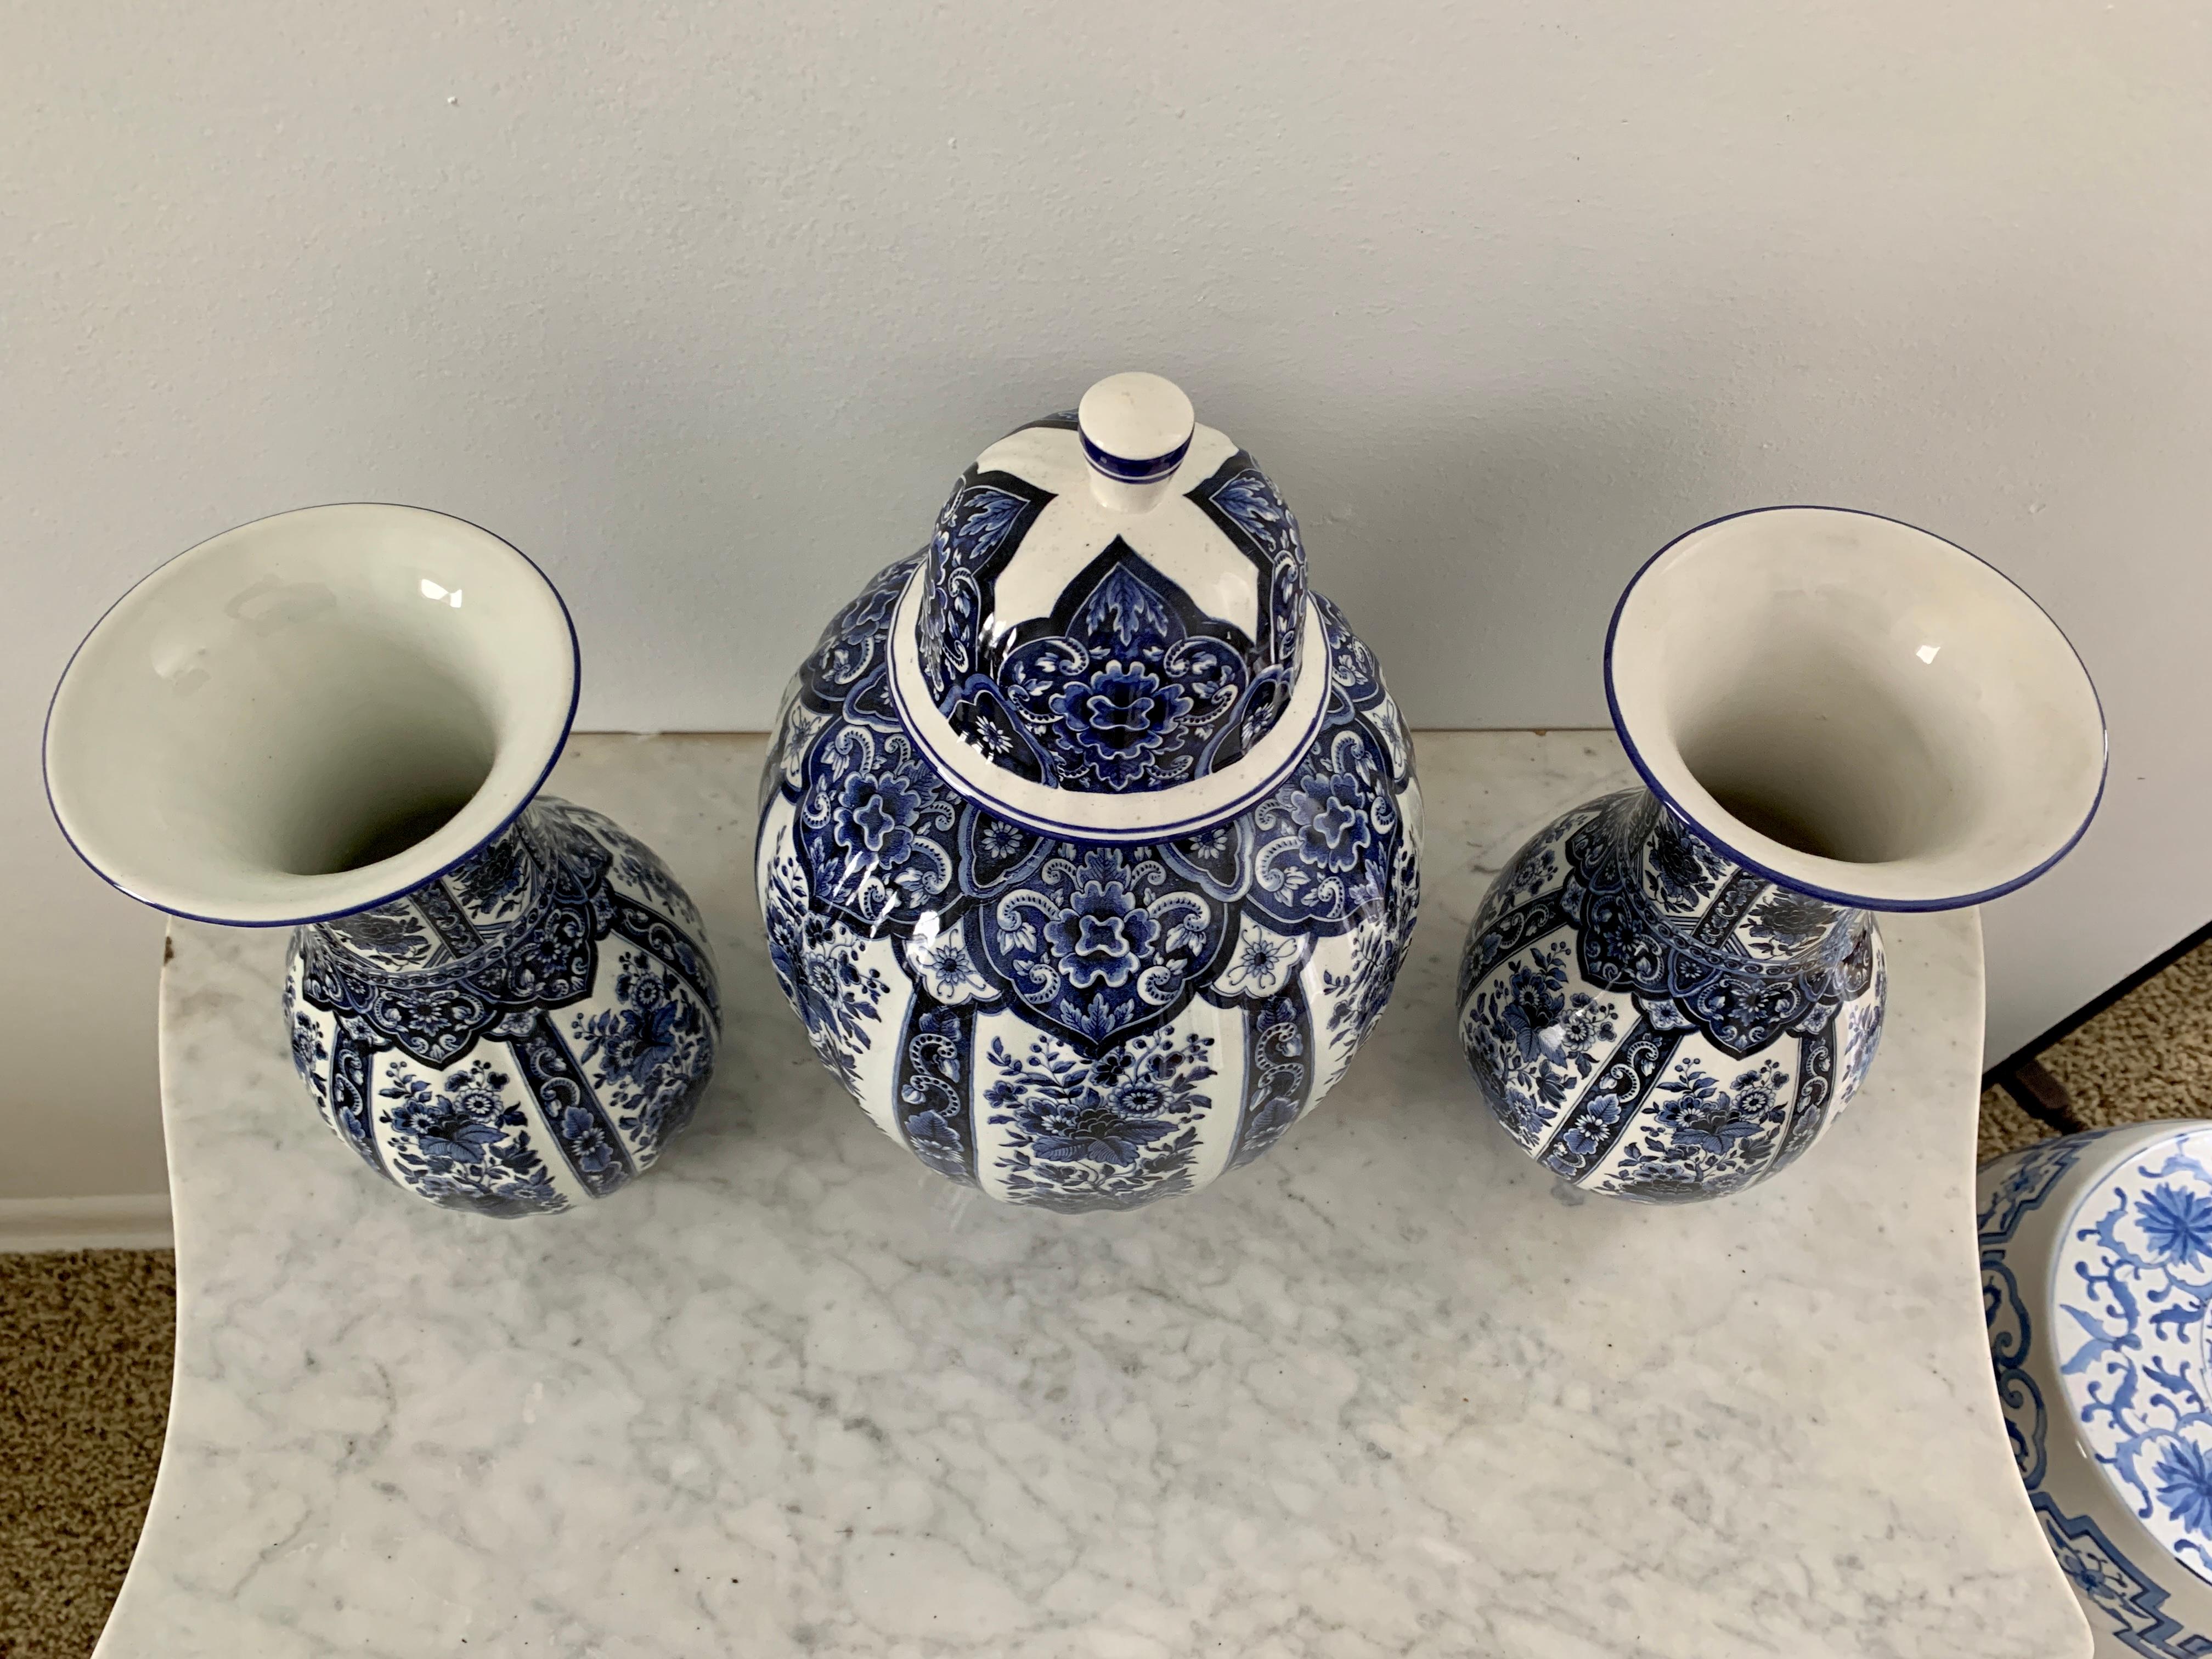 A wonderful set of beautiful Italian Chinoiserie or Delft style blue and white porcelains, including two vases and one covered jar. An instant collection! 

By Ardalt Blue Delfia

Italy, Mid-20th Century

Vases Measure: 5.25